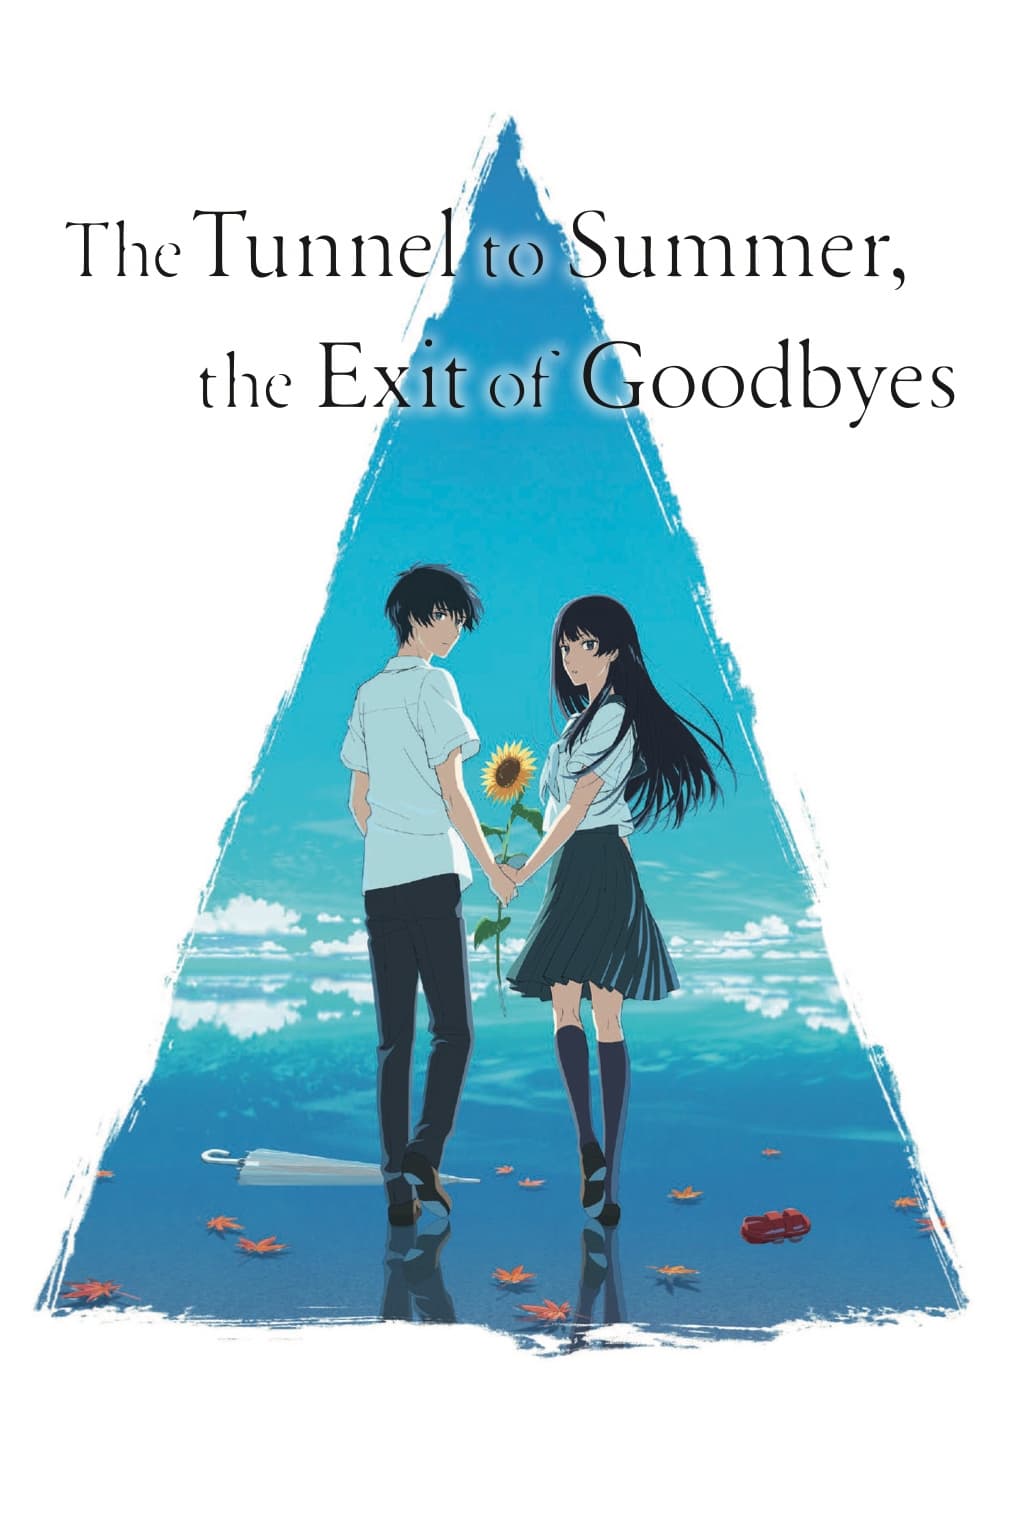 “The Tunnel to Summer, the Exit of Goodbyes” Poster 